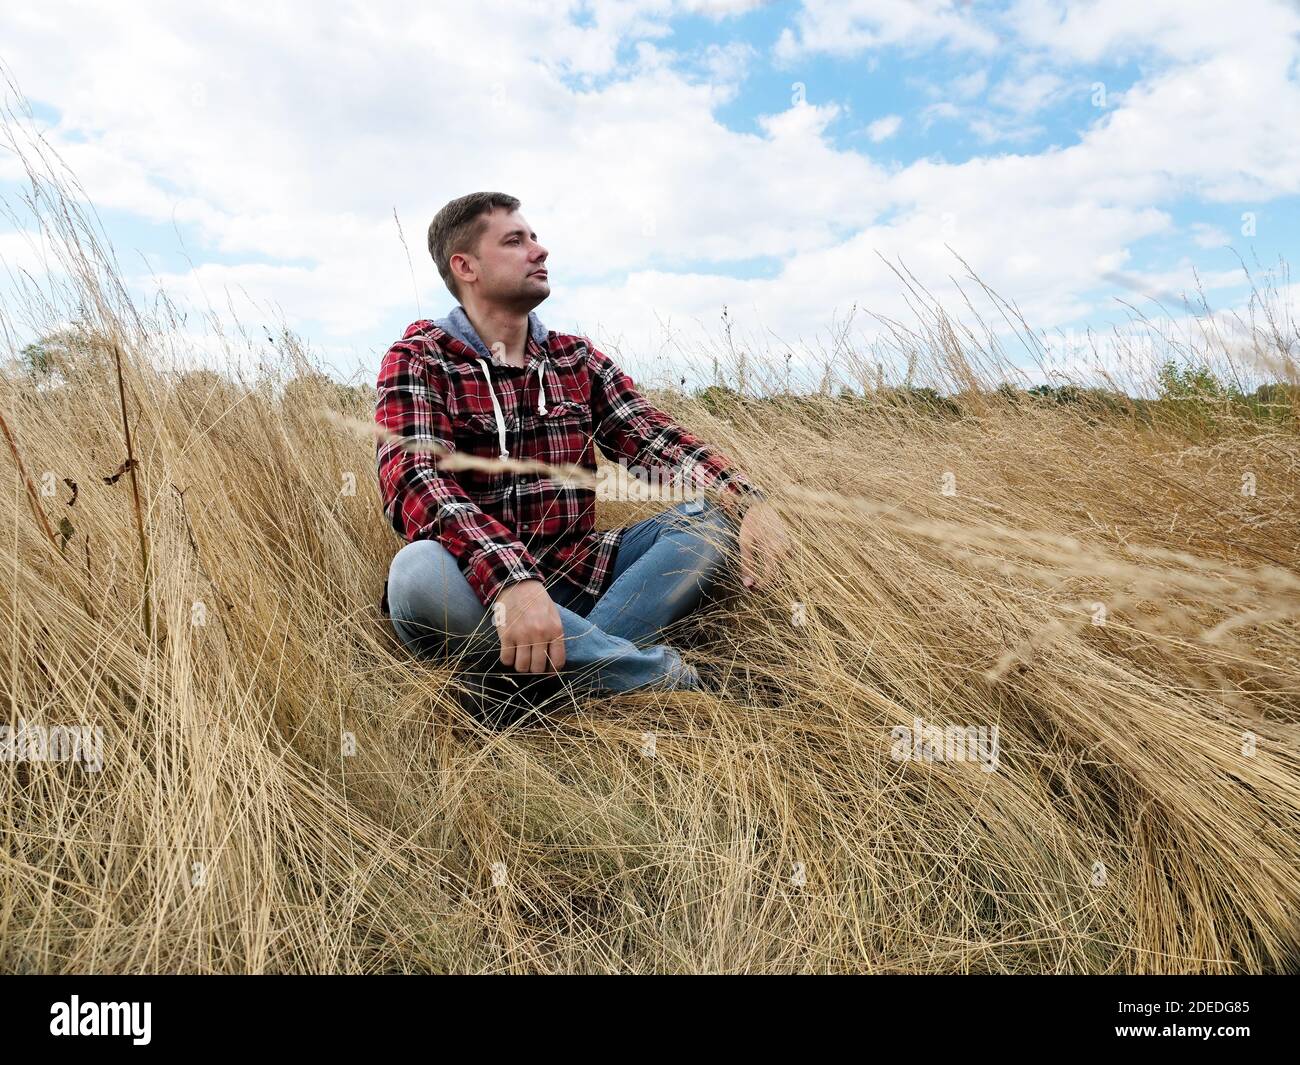 A man sits and relaxes in the middle of an autumn field in nature. Stock Photo